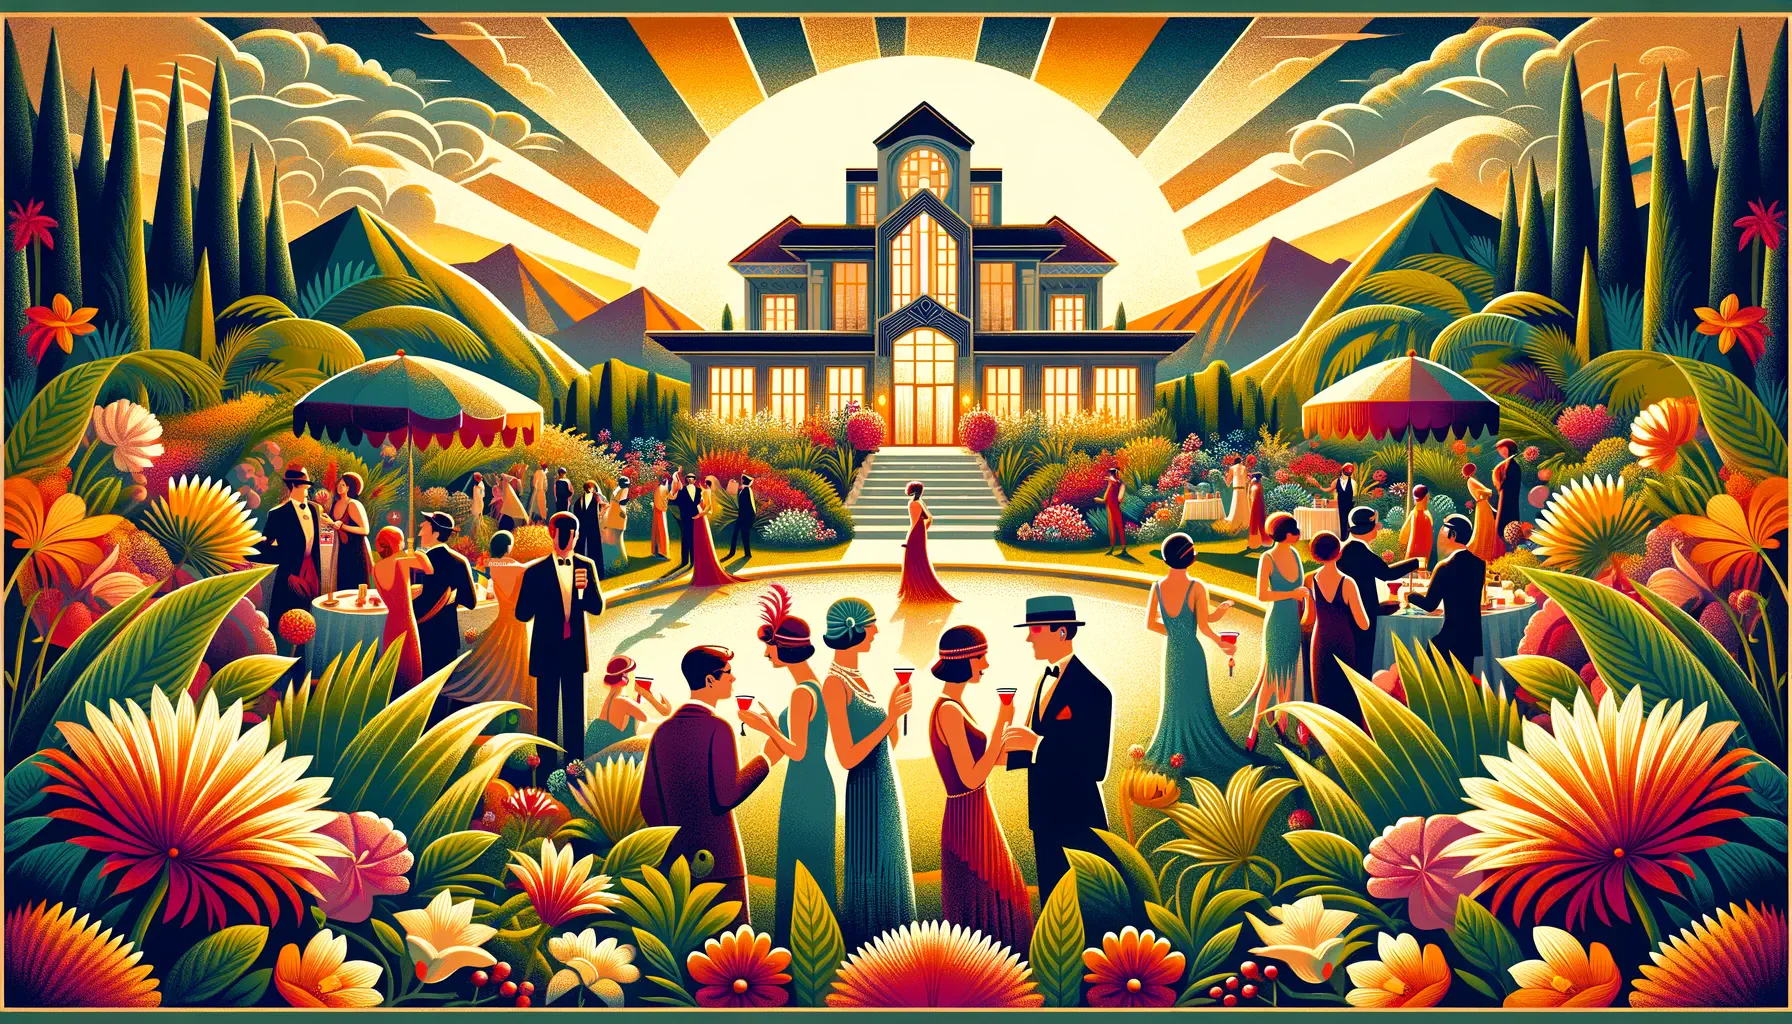 An art deco style image of a garden party with an imposing house in the background.